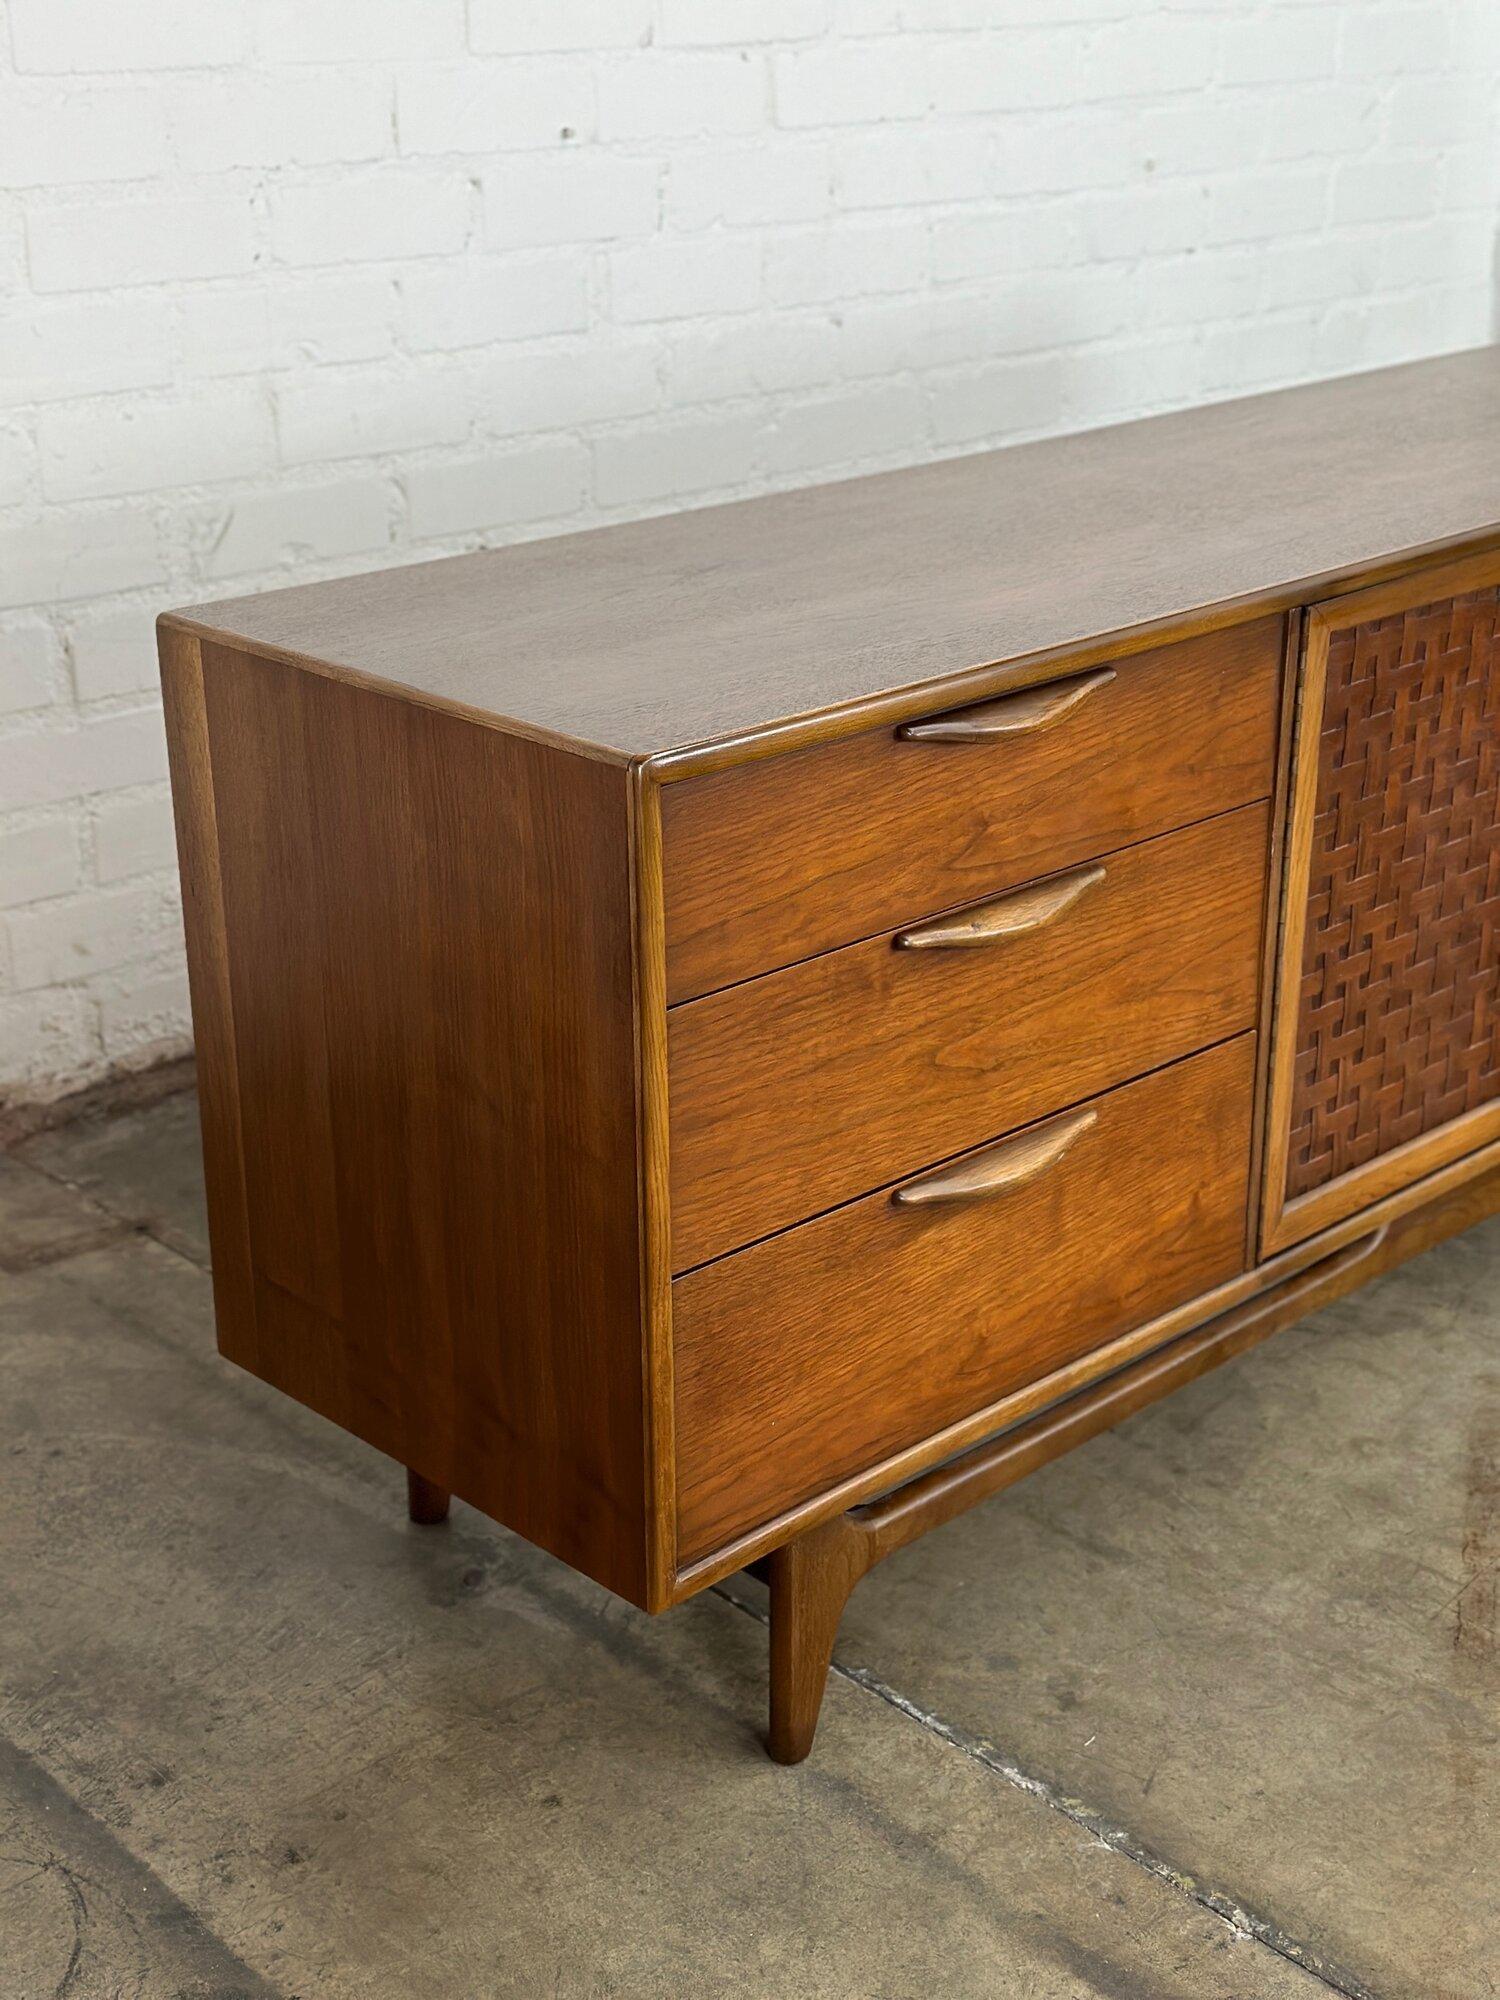 W80 D19 H30

Fully refinished 1960’s Perception series credenza by Lane. This walnut and oak credenza features 6 drawers with sculpted pulls,  and two woven detailed doors that open up to reveal 3 additional drawers.